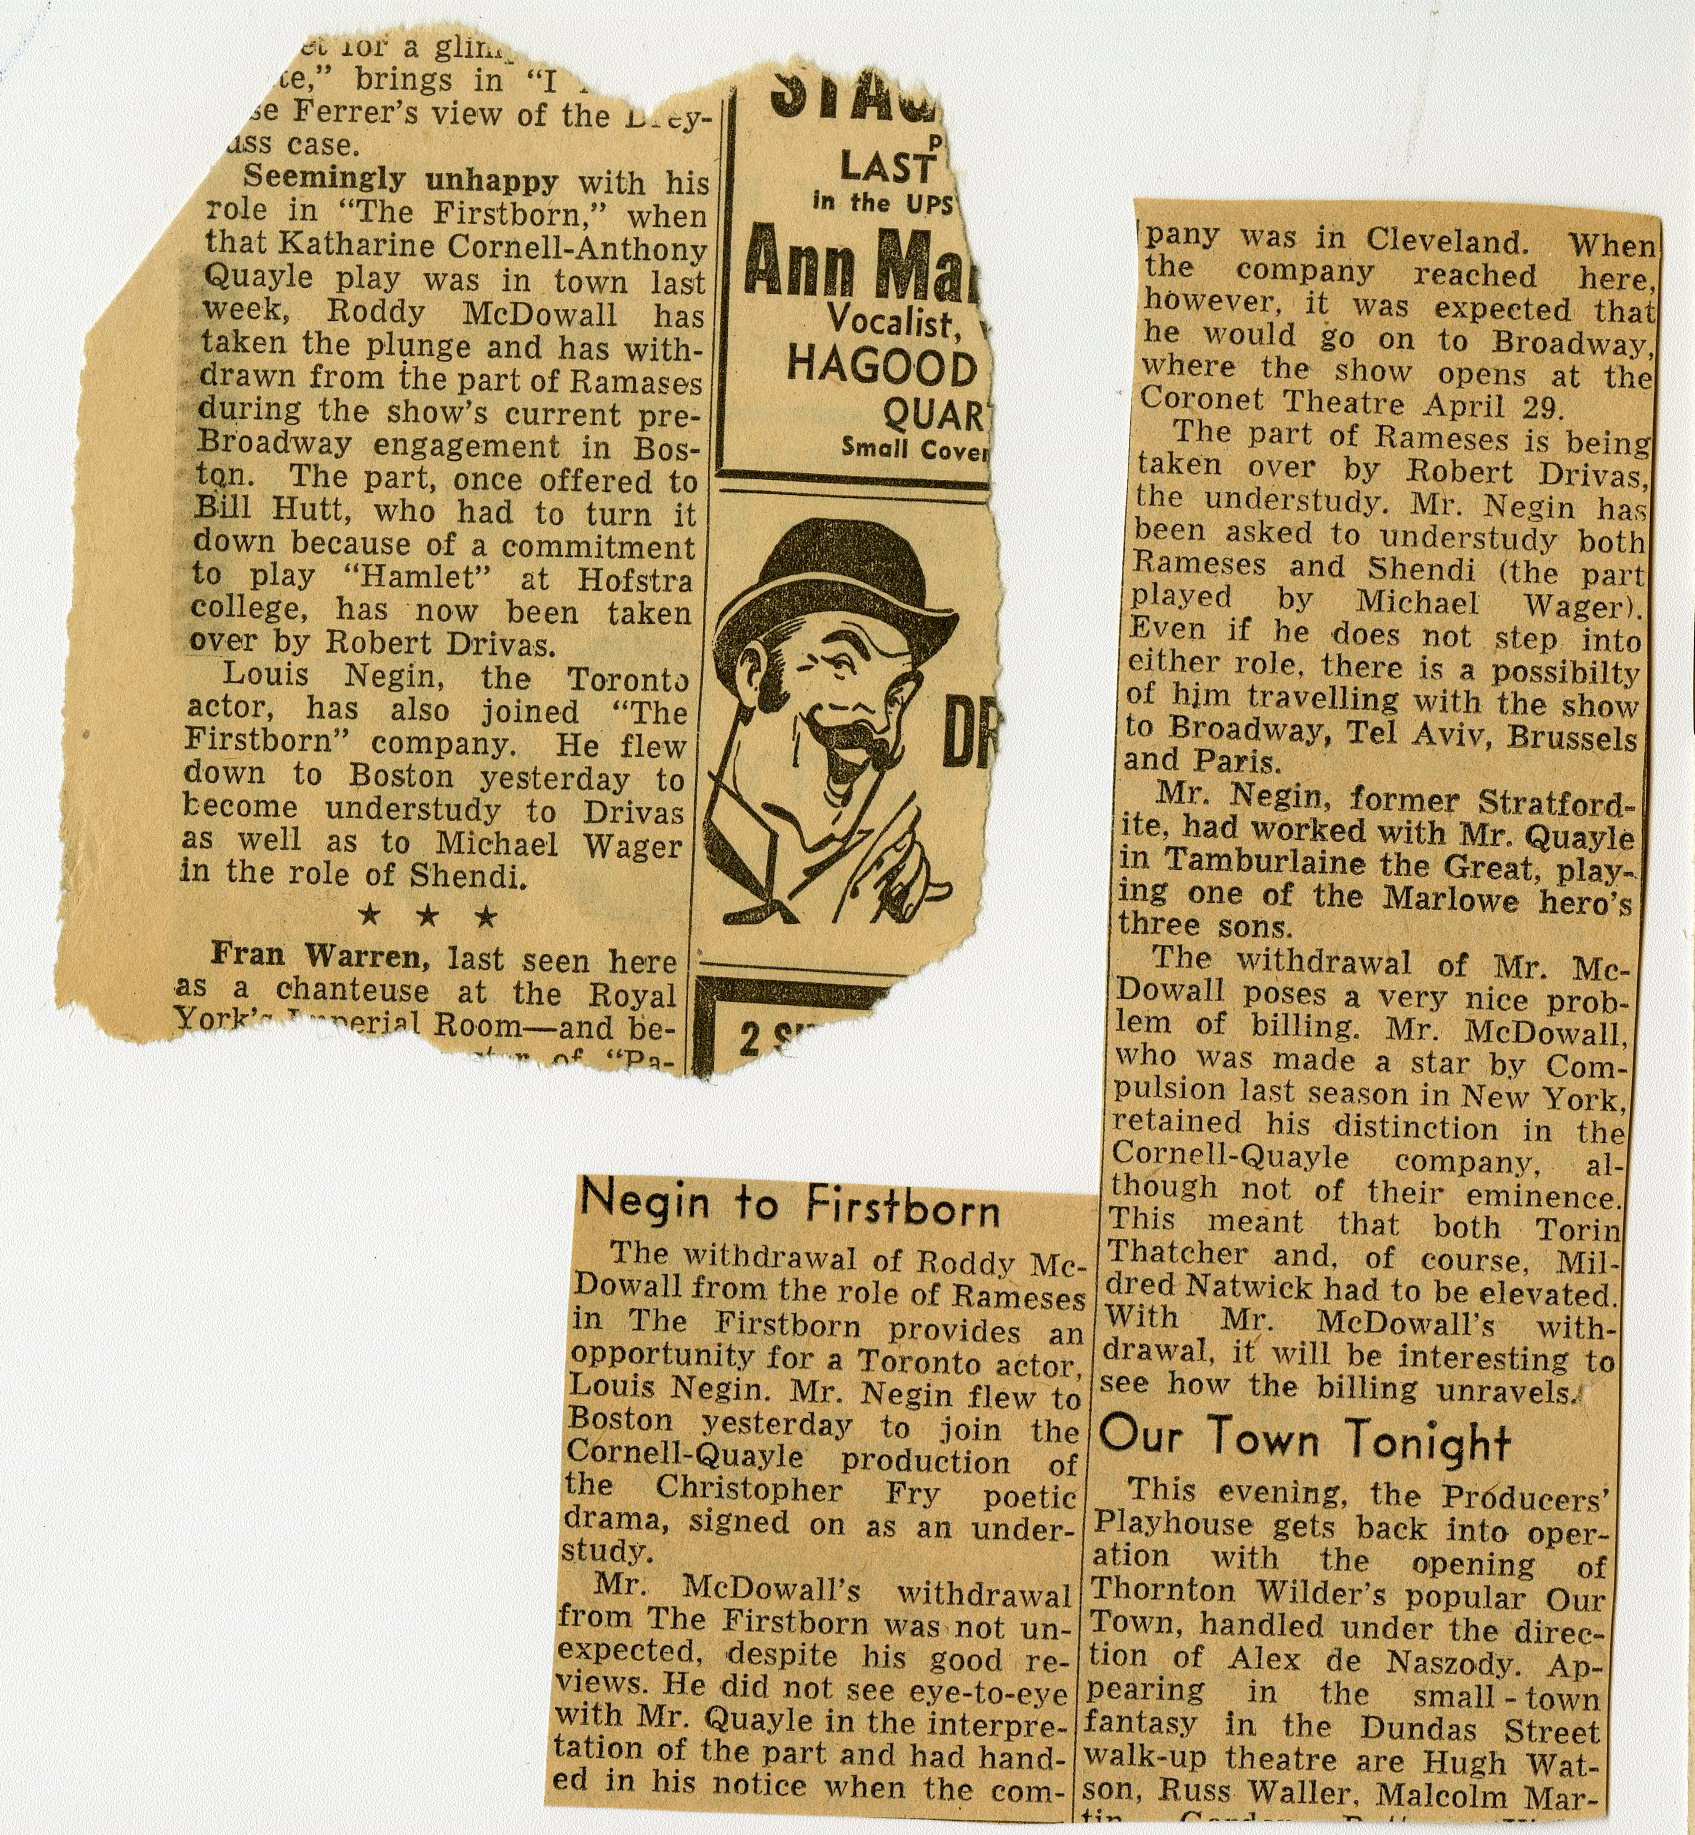 A newspaper clipping from The Firstborn, featuring commentary on the play and a cast photograph.